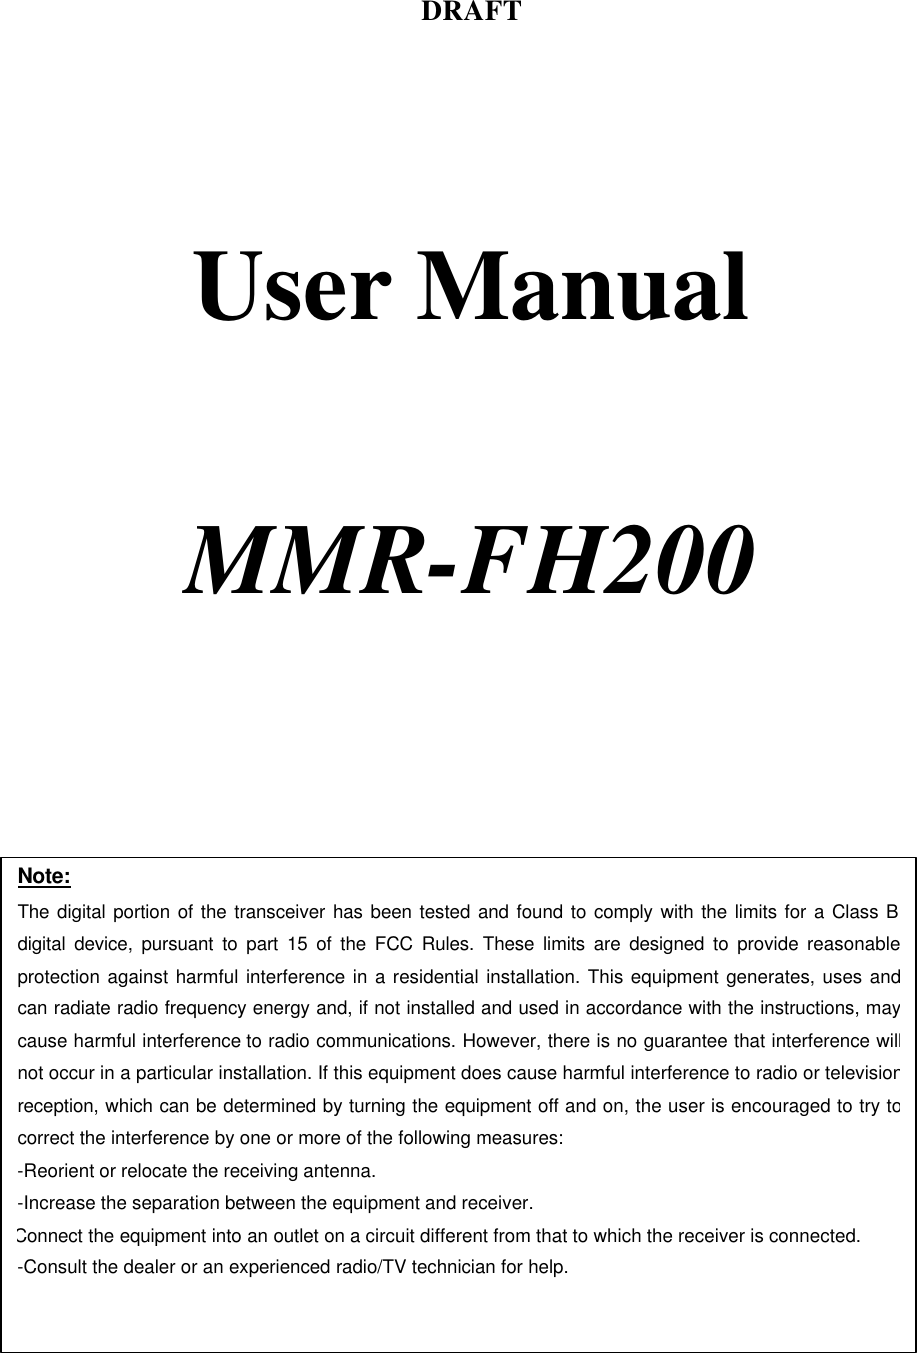 DRAFT     User Manual     MMR-FH200    Note: The digital portion of the transceiver has been tested and found to comply with the limits for a Class B digital device, pursuant to part 15 of the FCC Rules. These limits are designed to provide reasonable protection against harmful interference in a residential installation. This equipment generates, uses and can radiate radio frequency energy and, if not installed and used in accordance with the instructions, may cause harmful interference to radio communications. However, there is no guarantee that interference will not occur in a particular installation. If this equipment does cause harmful interference to radio or television reception, which can be determined by turning the equipment off and on, the user is encouraged to try to correct the interference by one or more of the following measures:  -Reorient or relocate the receiving antenna. -Increase the separation between the equipment and receiver. Connect the equipment into an outlet on a circuit different from that to which the receiver is connected. -Consult the dealer or an experienced radio/TV technician for help.  